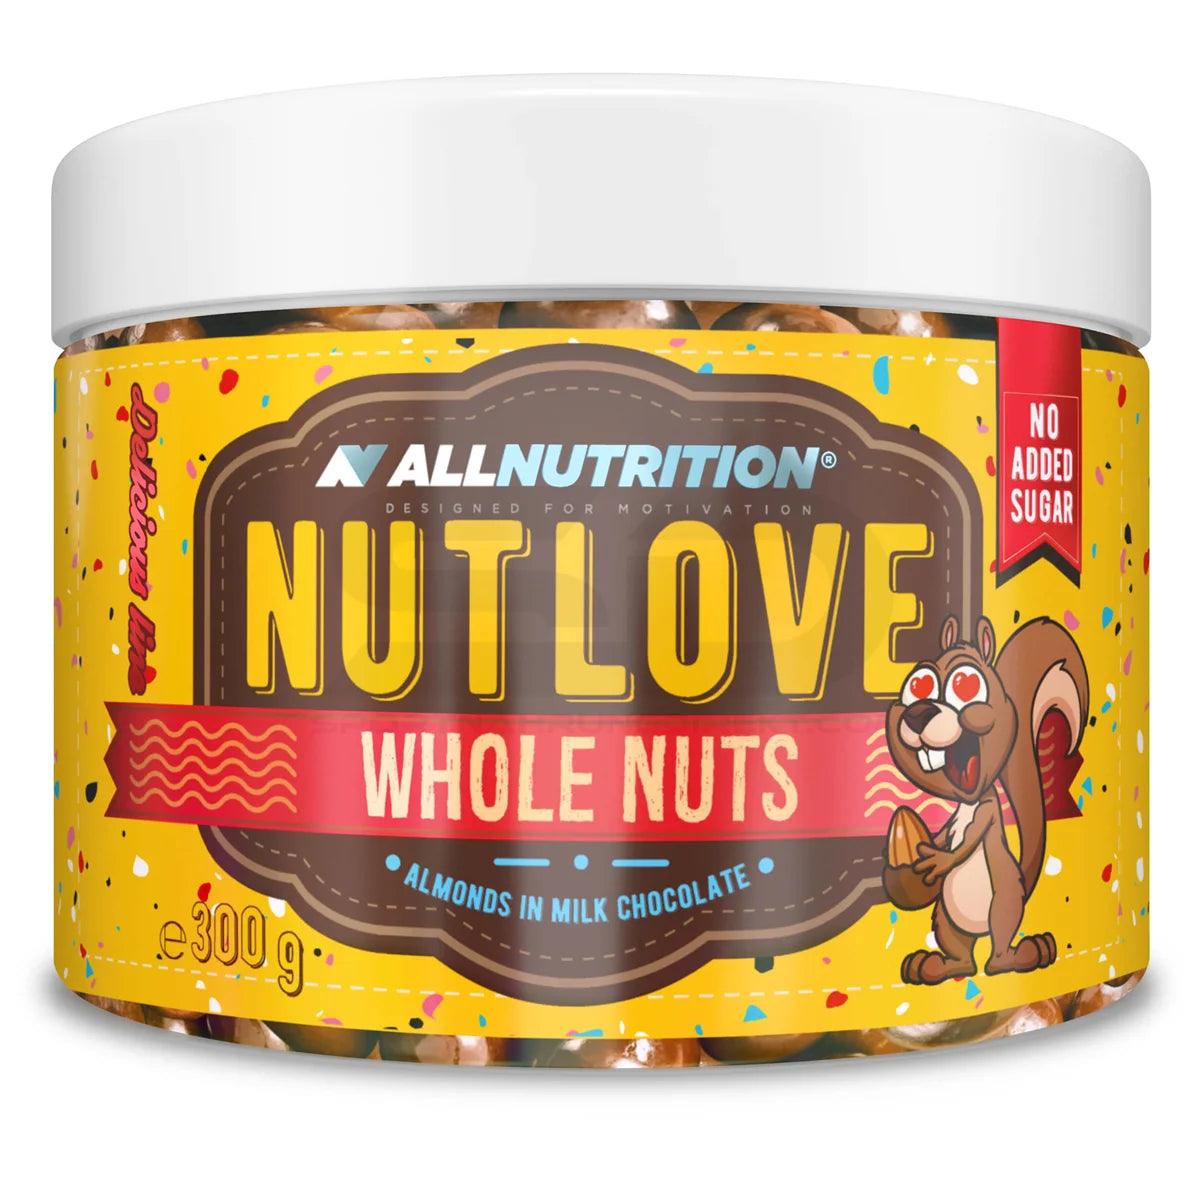 ALL NUTRITION® WHOLE NUTS 300g ALMONDS - Supplement Support